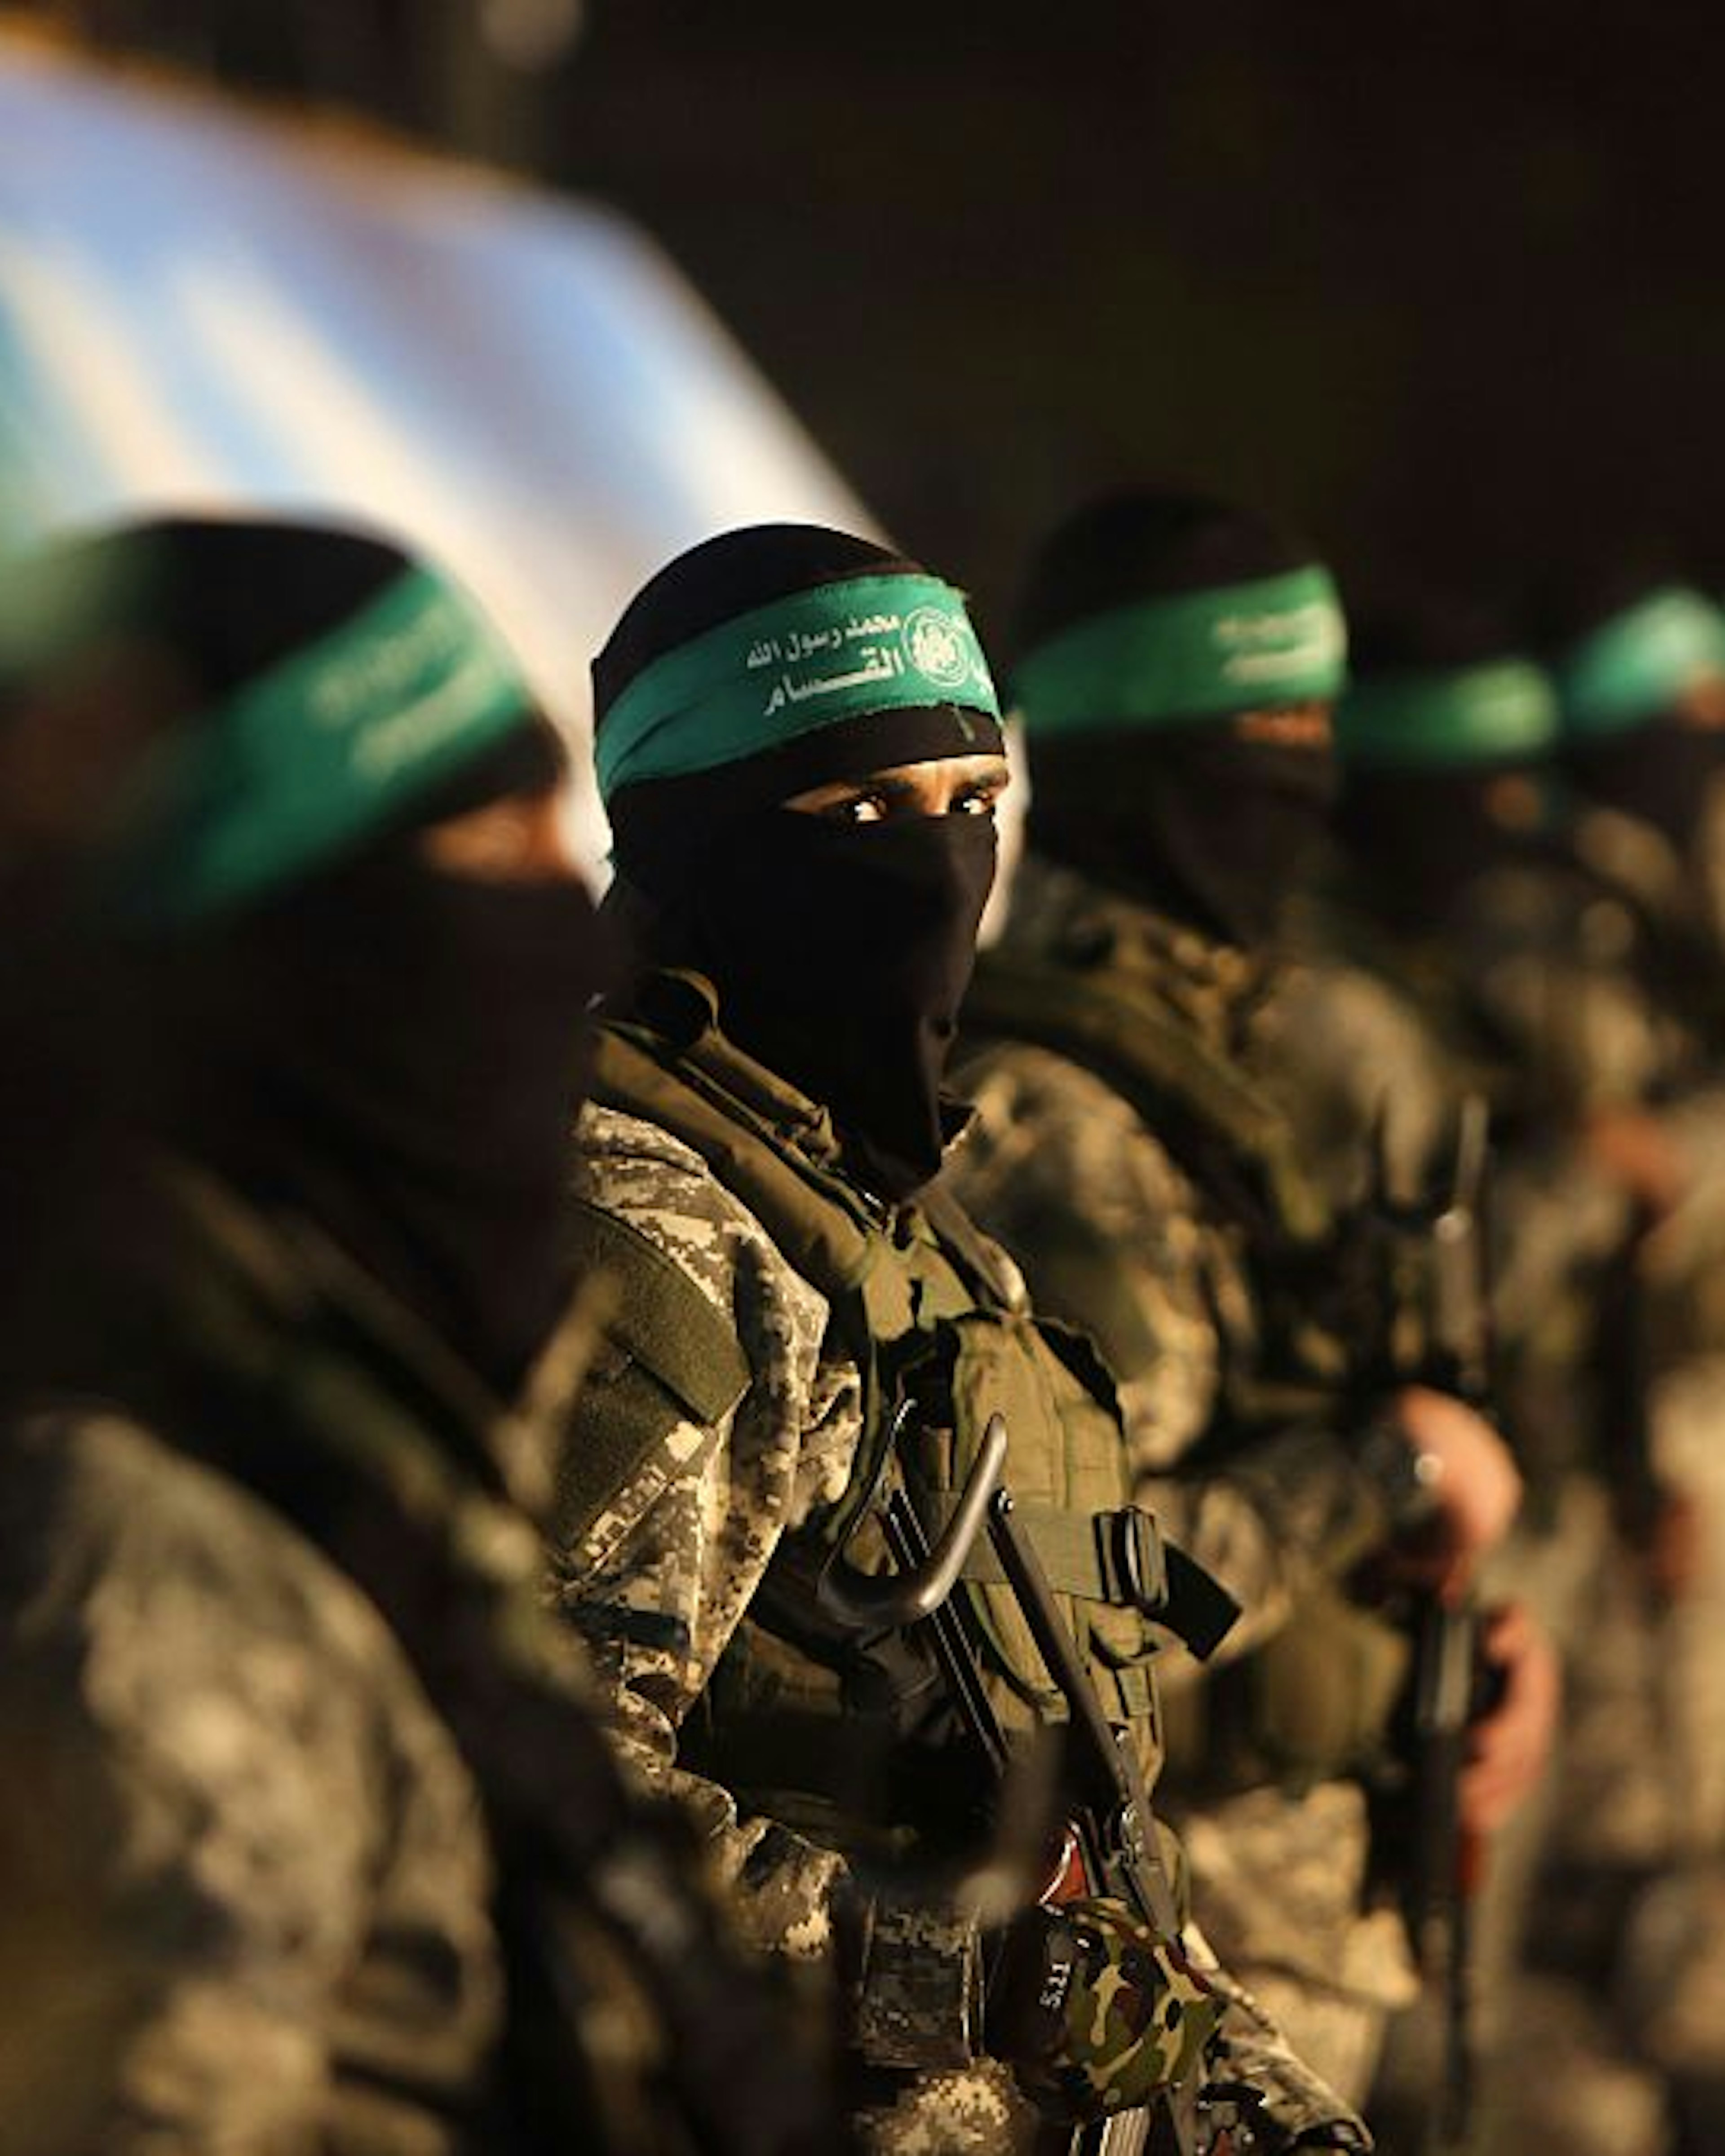 TOPSHOT - Palestinian members of the Ezzedine al-Qassam Brigades, the armed wing of the Hamas movement, take part in a gathering on January 31, 2016 in Gaza city to pay tribute to their fellow militants who died after a tunnel collapsed in the Gaza Strip.